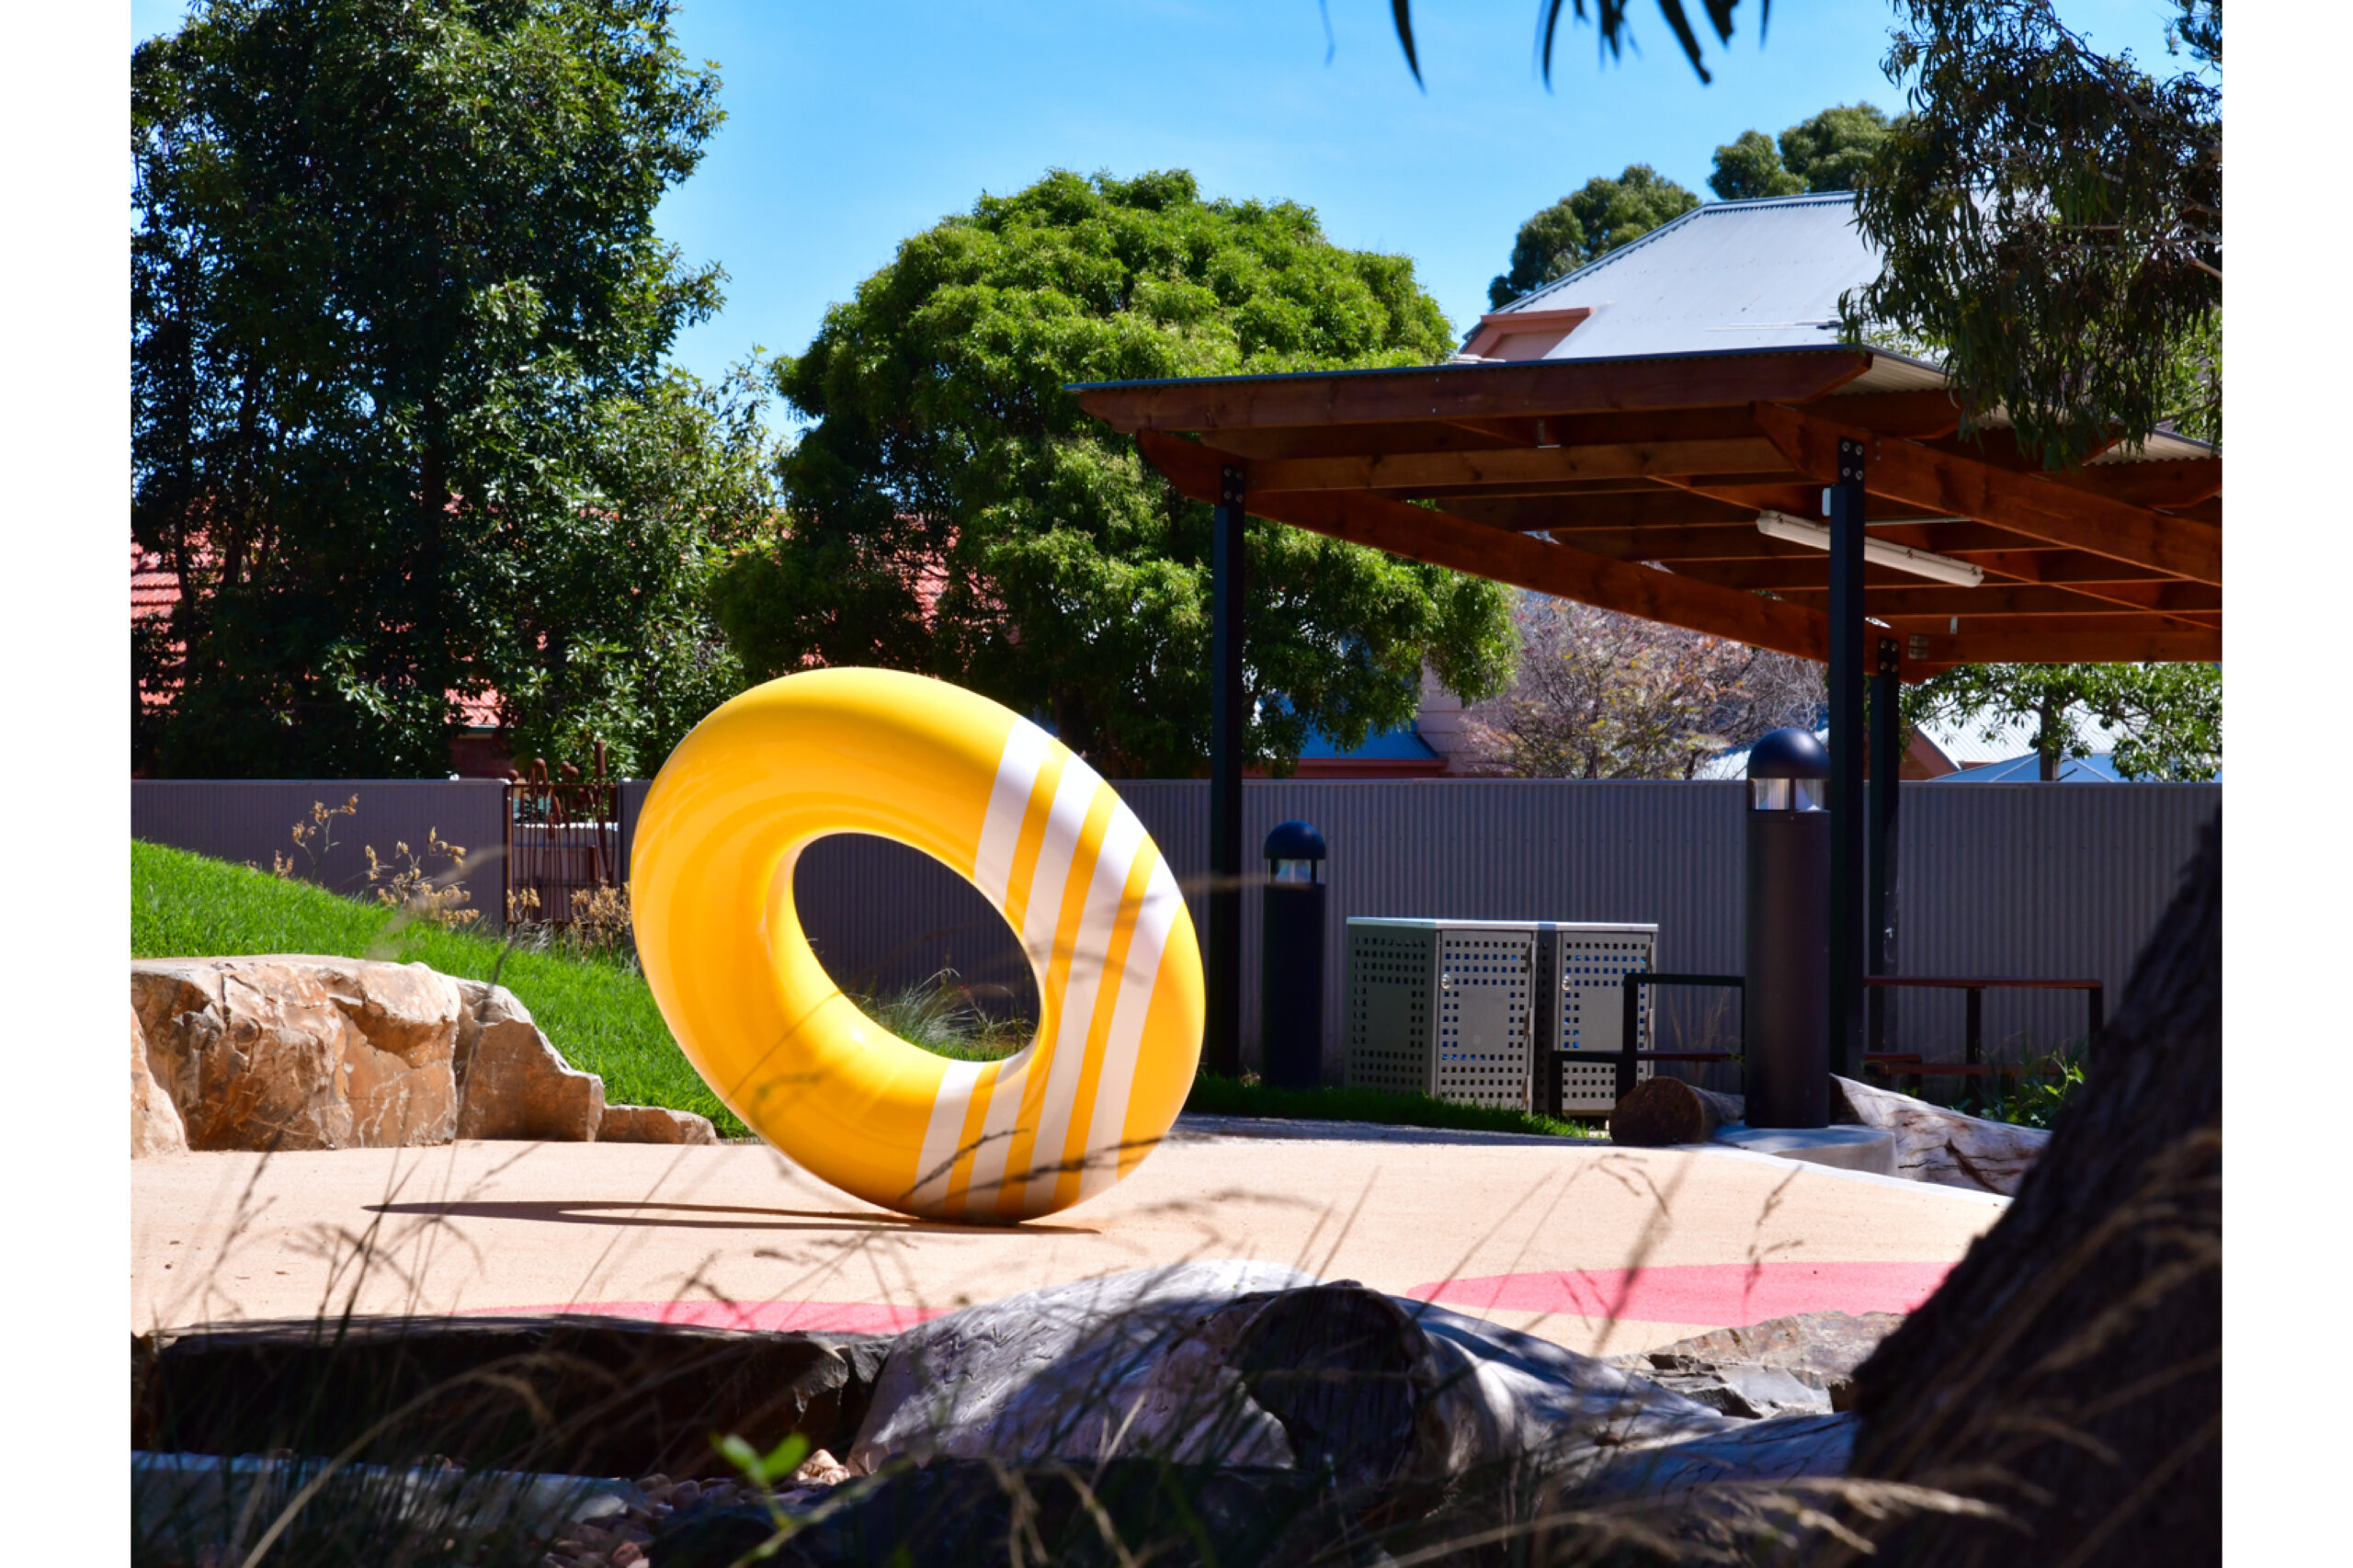 Image of a yellow, donut-shaped play sculpture, "The Third Quarter".